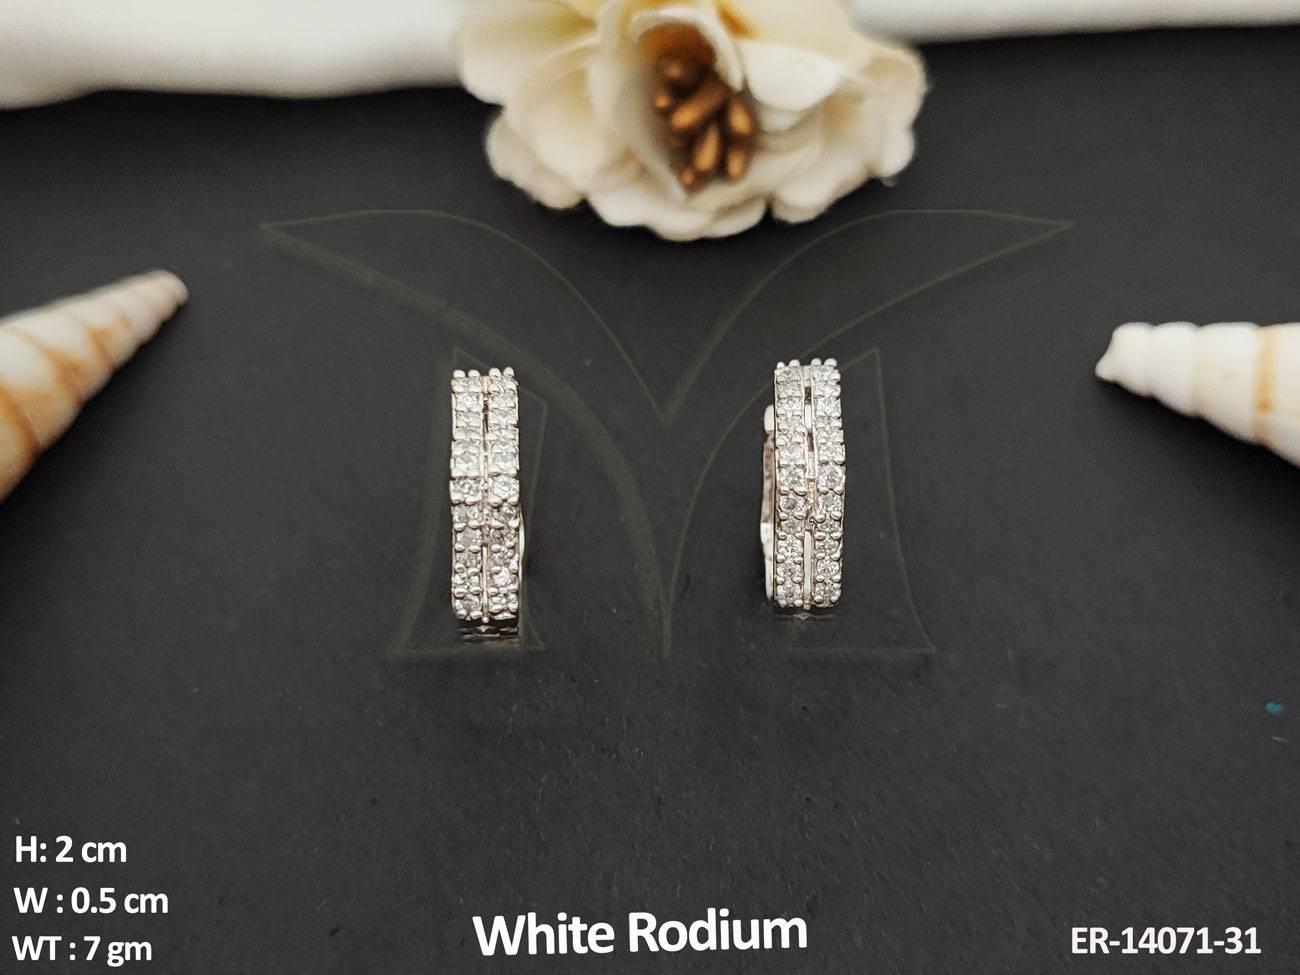 Introducing Full Stone Designer Wear White Rodium Polish Ad Tops Studs Earrings. These elegant earrings feature a stunning polished finish and are perfect for any occasion.